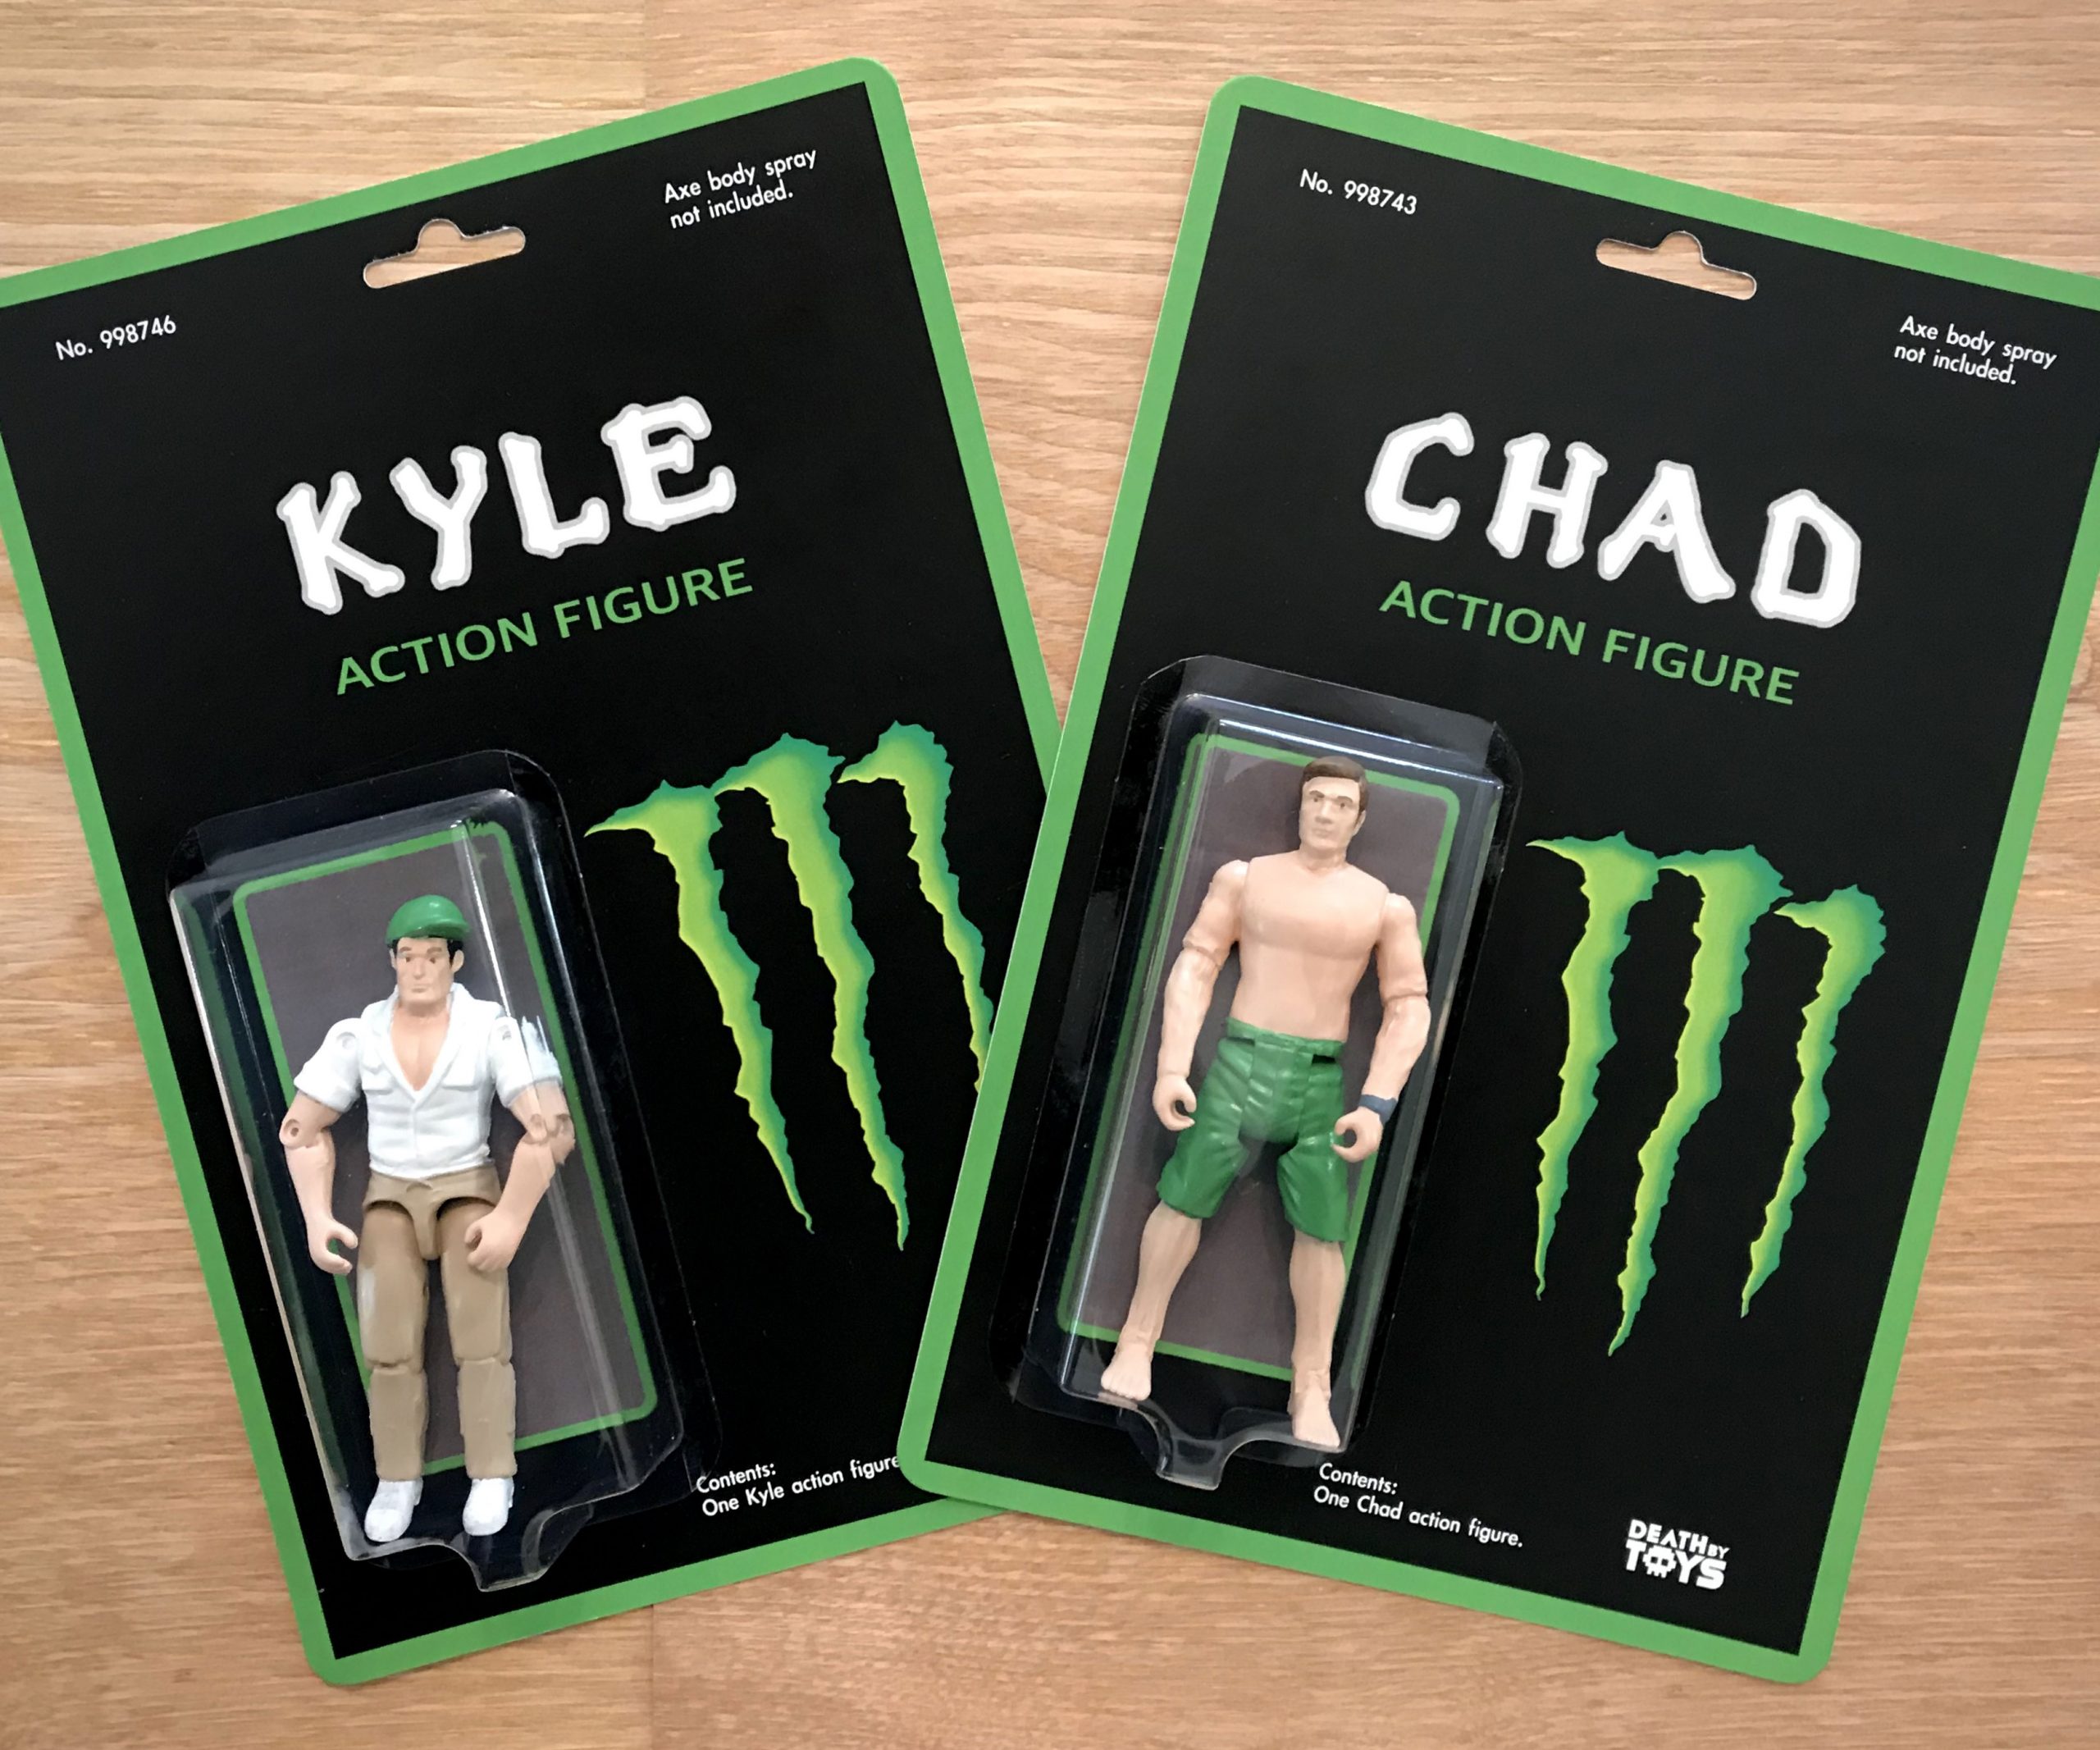 Chad & Kyle Action Figures